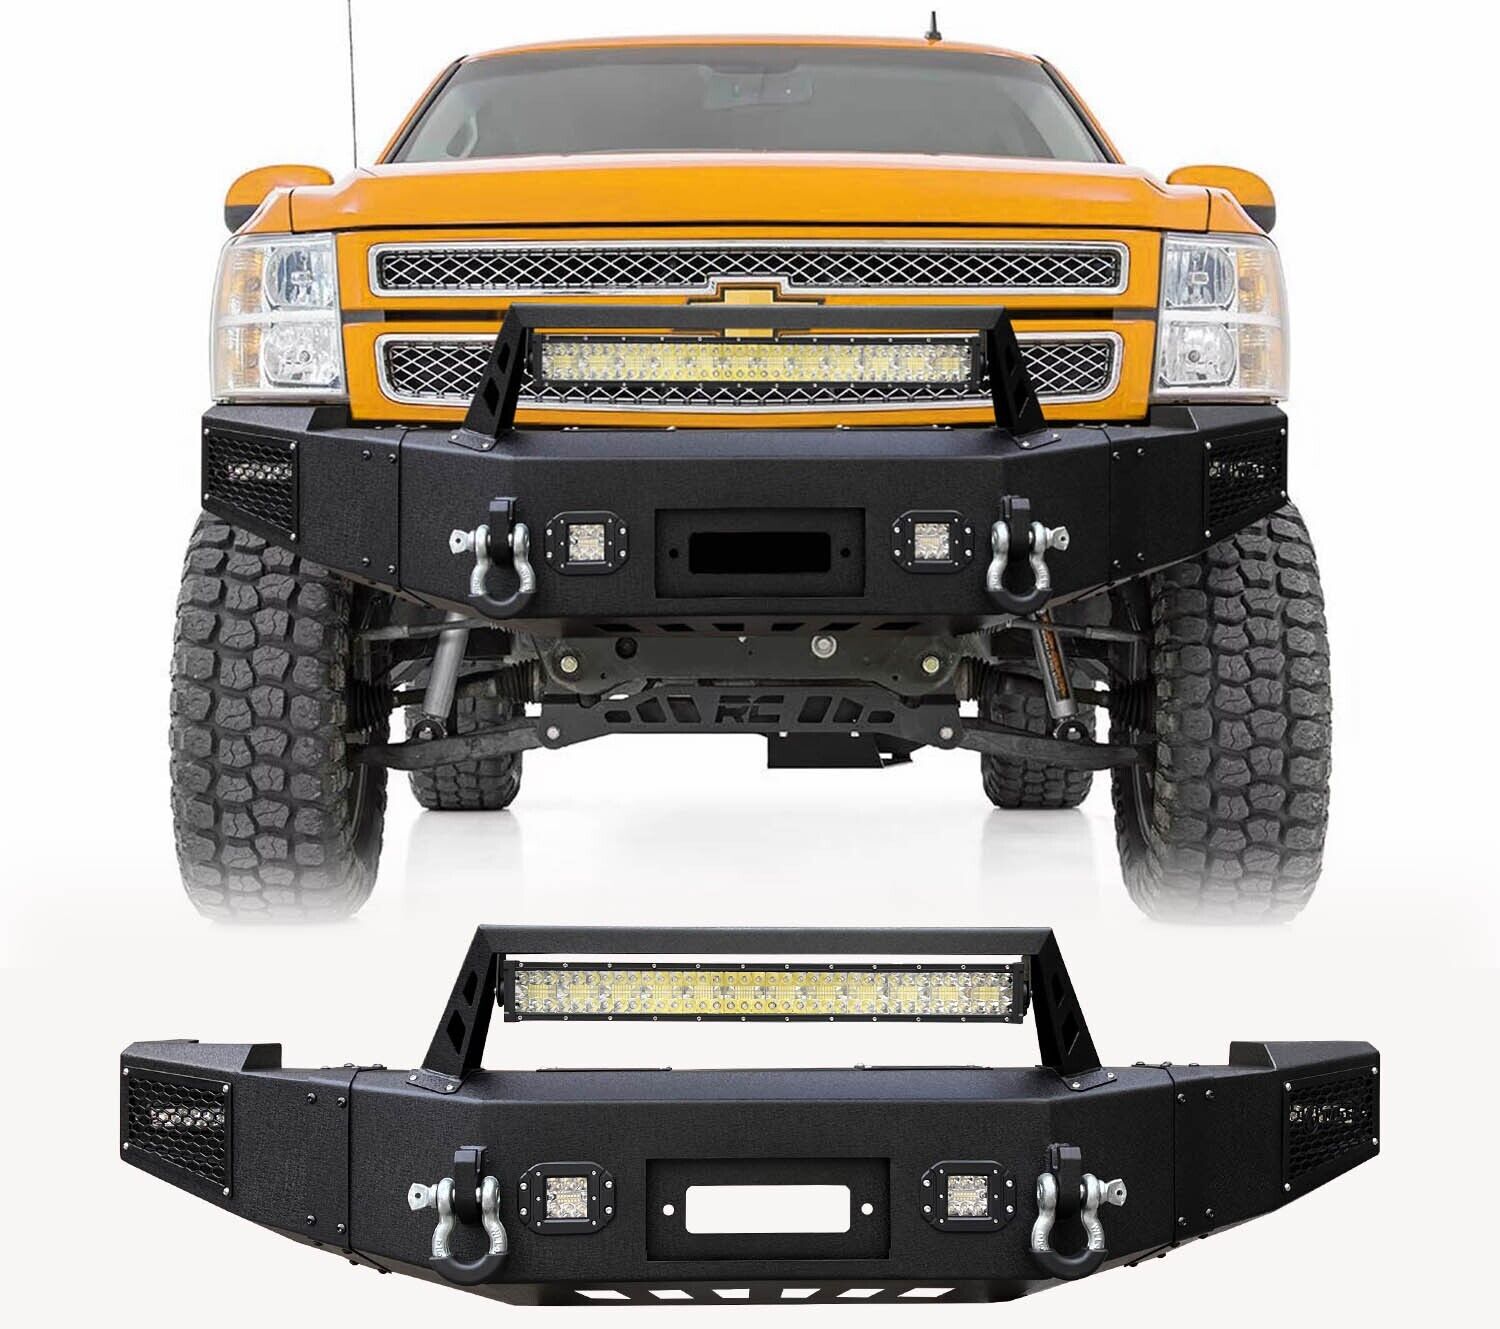 NEW Black Painted Steel Front Bumper W/LED Lights For 07-13 Chevy Silverado 1500